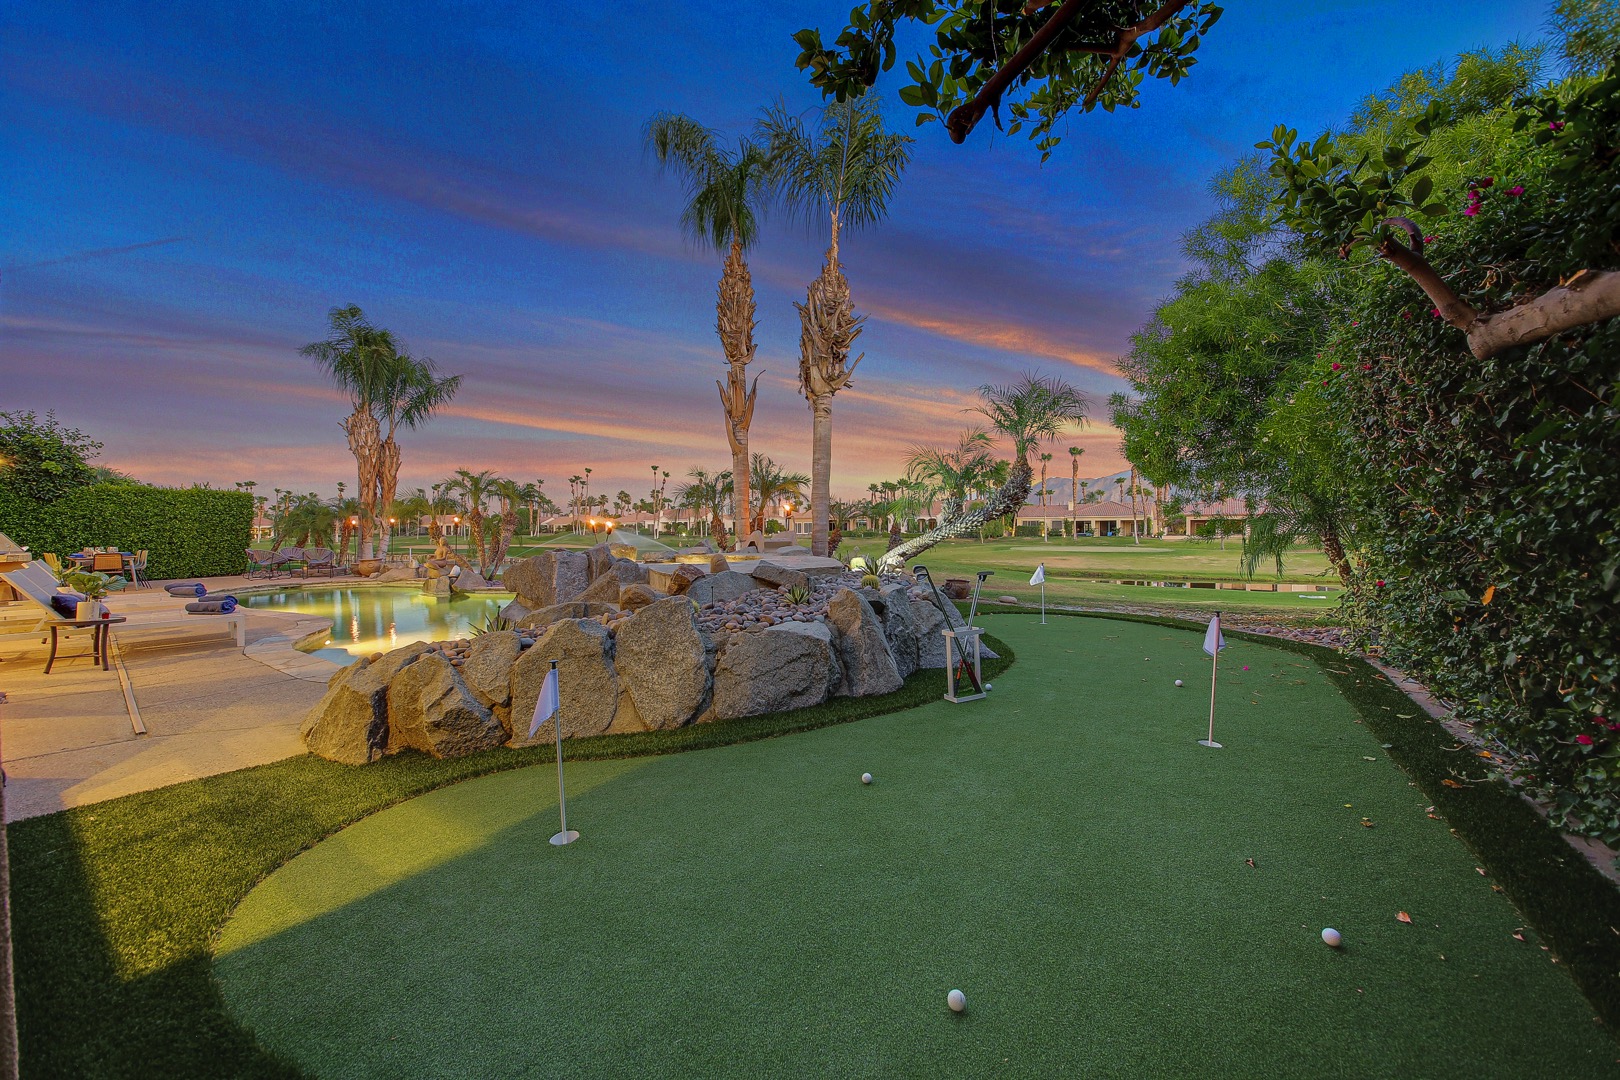 Practice your golf skills and challenge a friend on the brand new putting green.